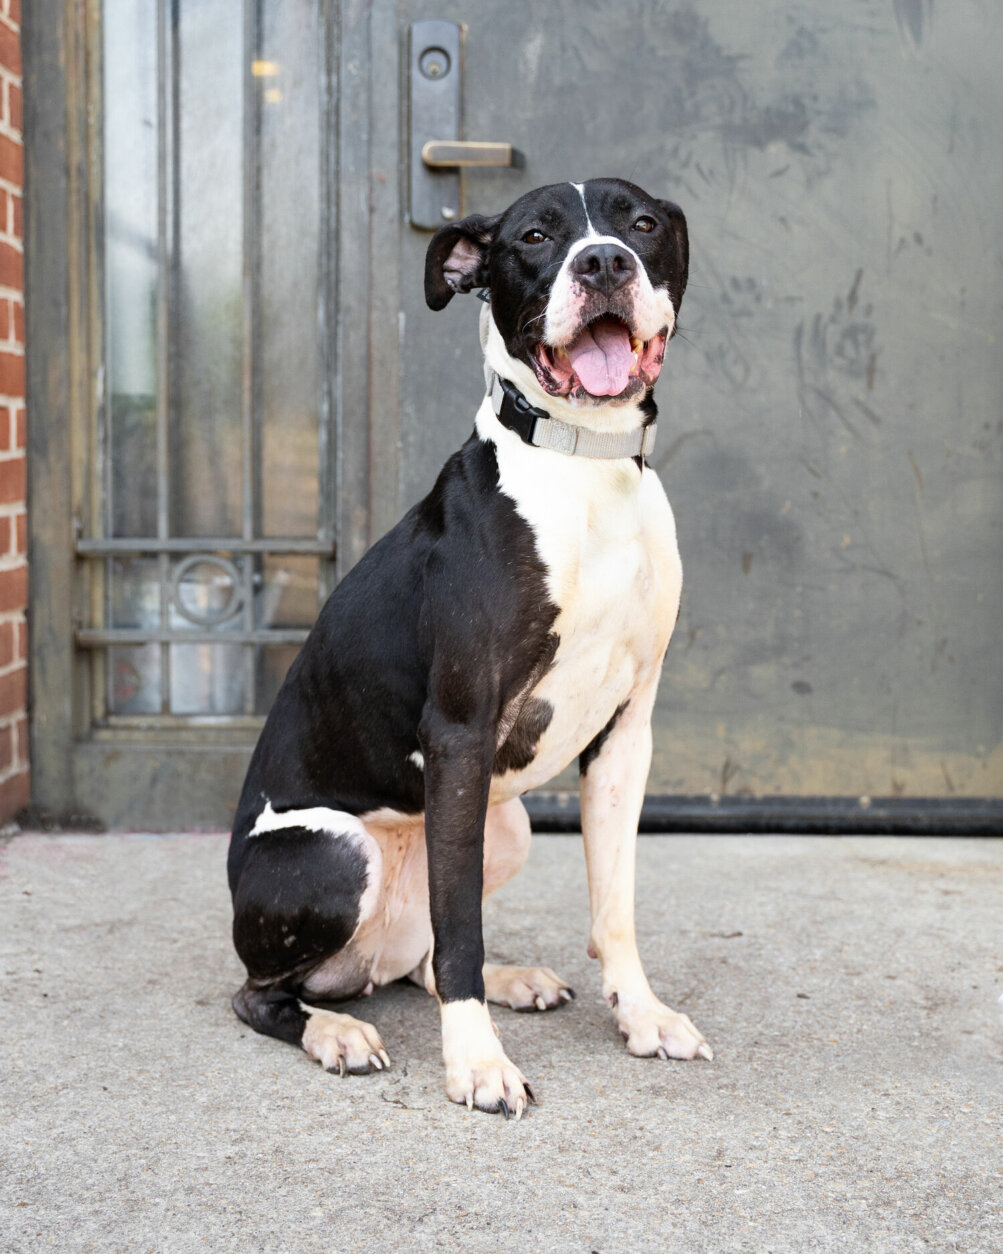 <p>Meet Dutchess! She is an energetic, 1-year-old pup ready to steal your heart. Dutchess has been working hard on her basic manners and has come a long way since arriving at the Humane Rescue Alliance. She&#8217;s a quick learner and ready to keep up her training with her new family. If you&#8217;re looking for a social pup and you&#8217;ve got some patience, treats, and want to have a good time working with a terrific dog, set up a virtual meet and greet with Dutchess today! Visit humanerescuealliance.org/adopt to learn more about adopting or fostering dogs like Dutchess.</p>
